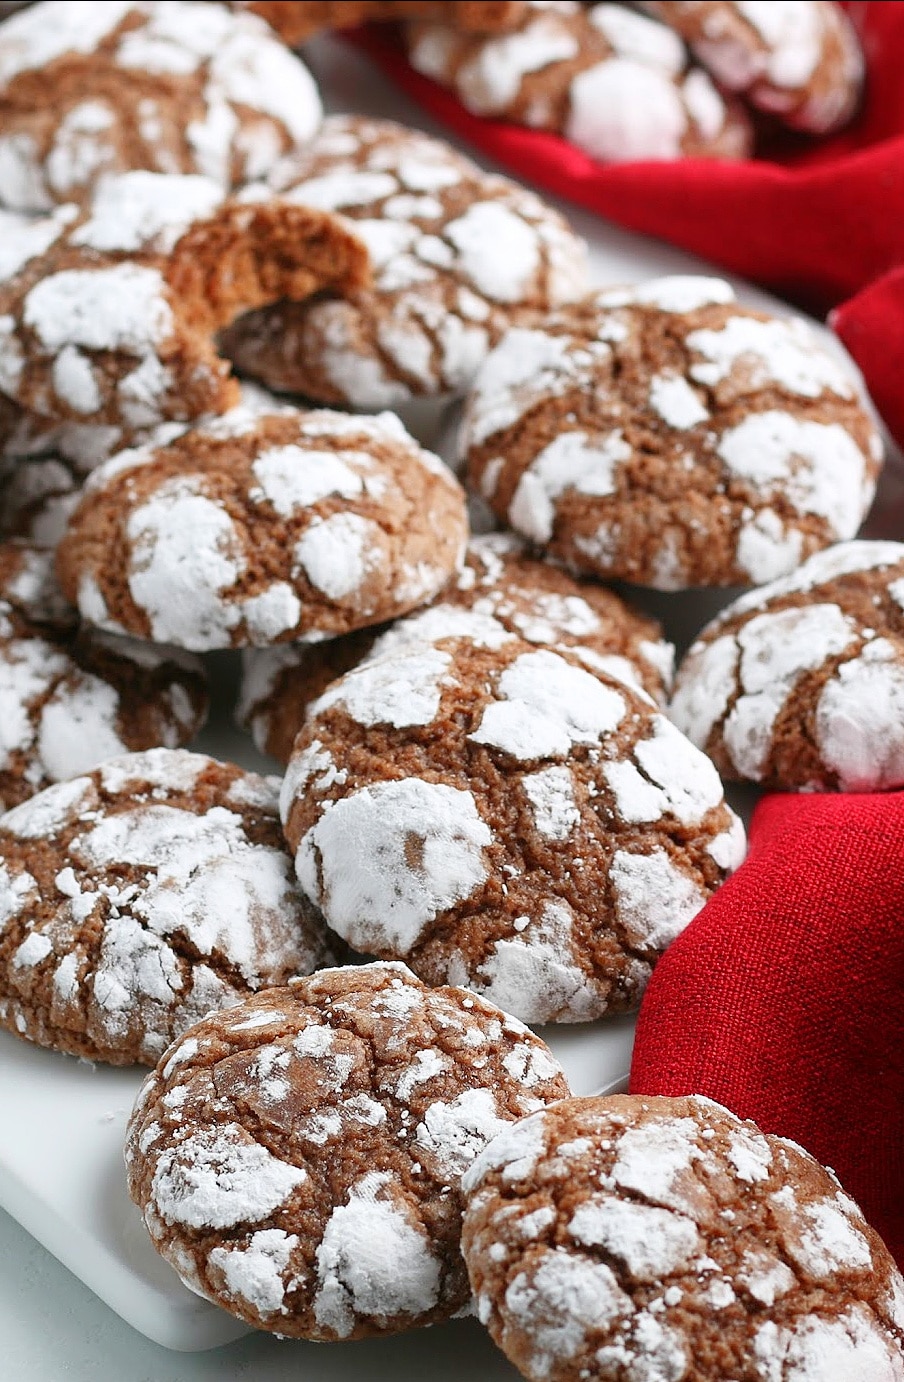 Recipe for Chocolate Crinkle Cookies